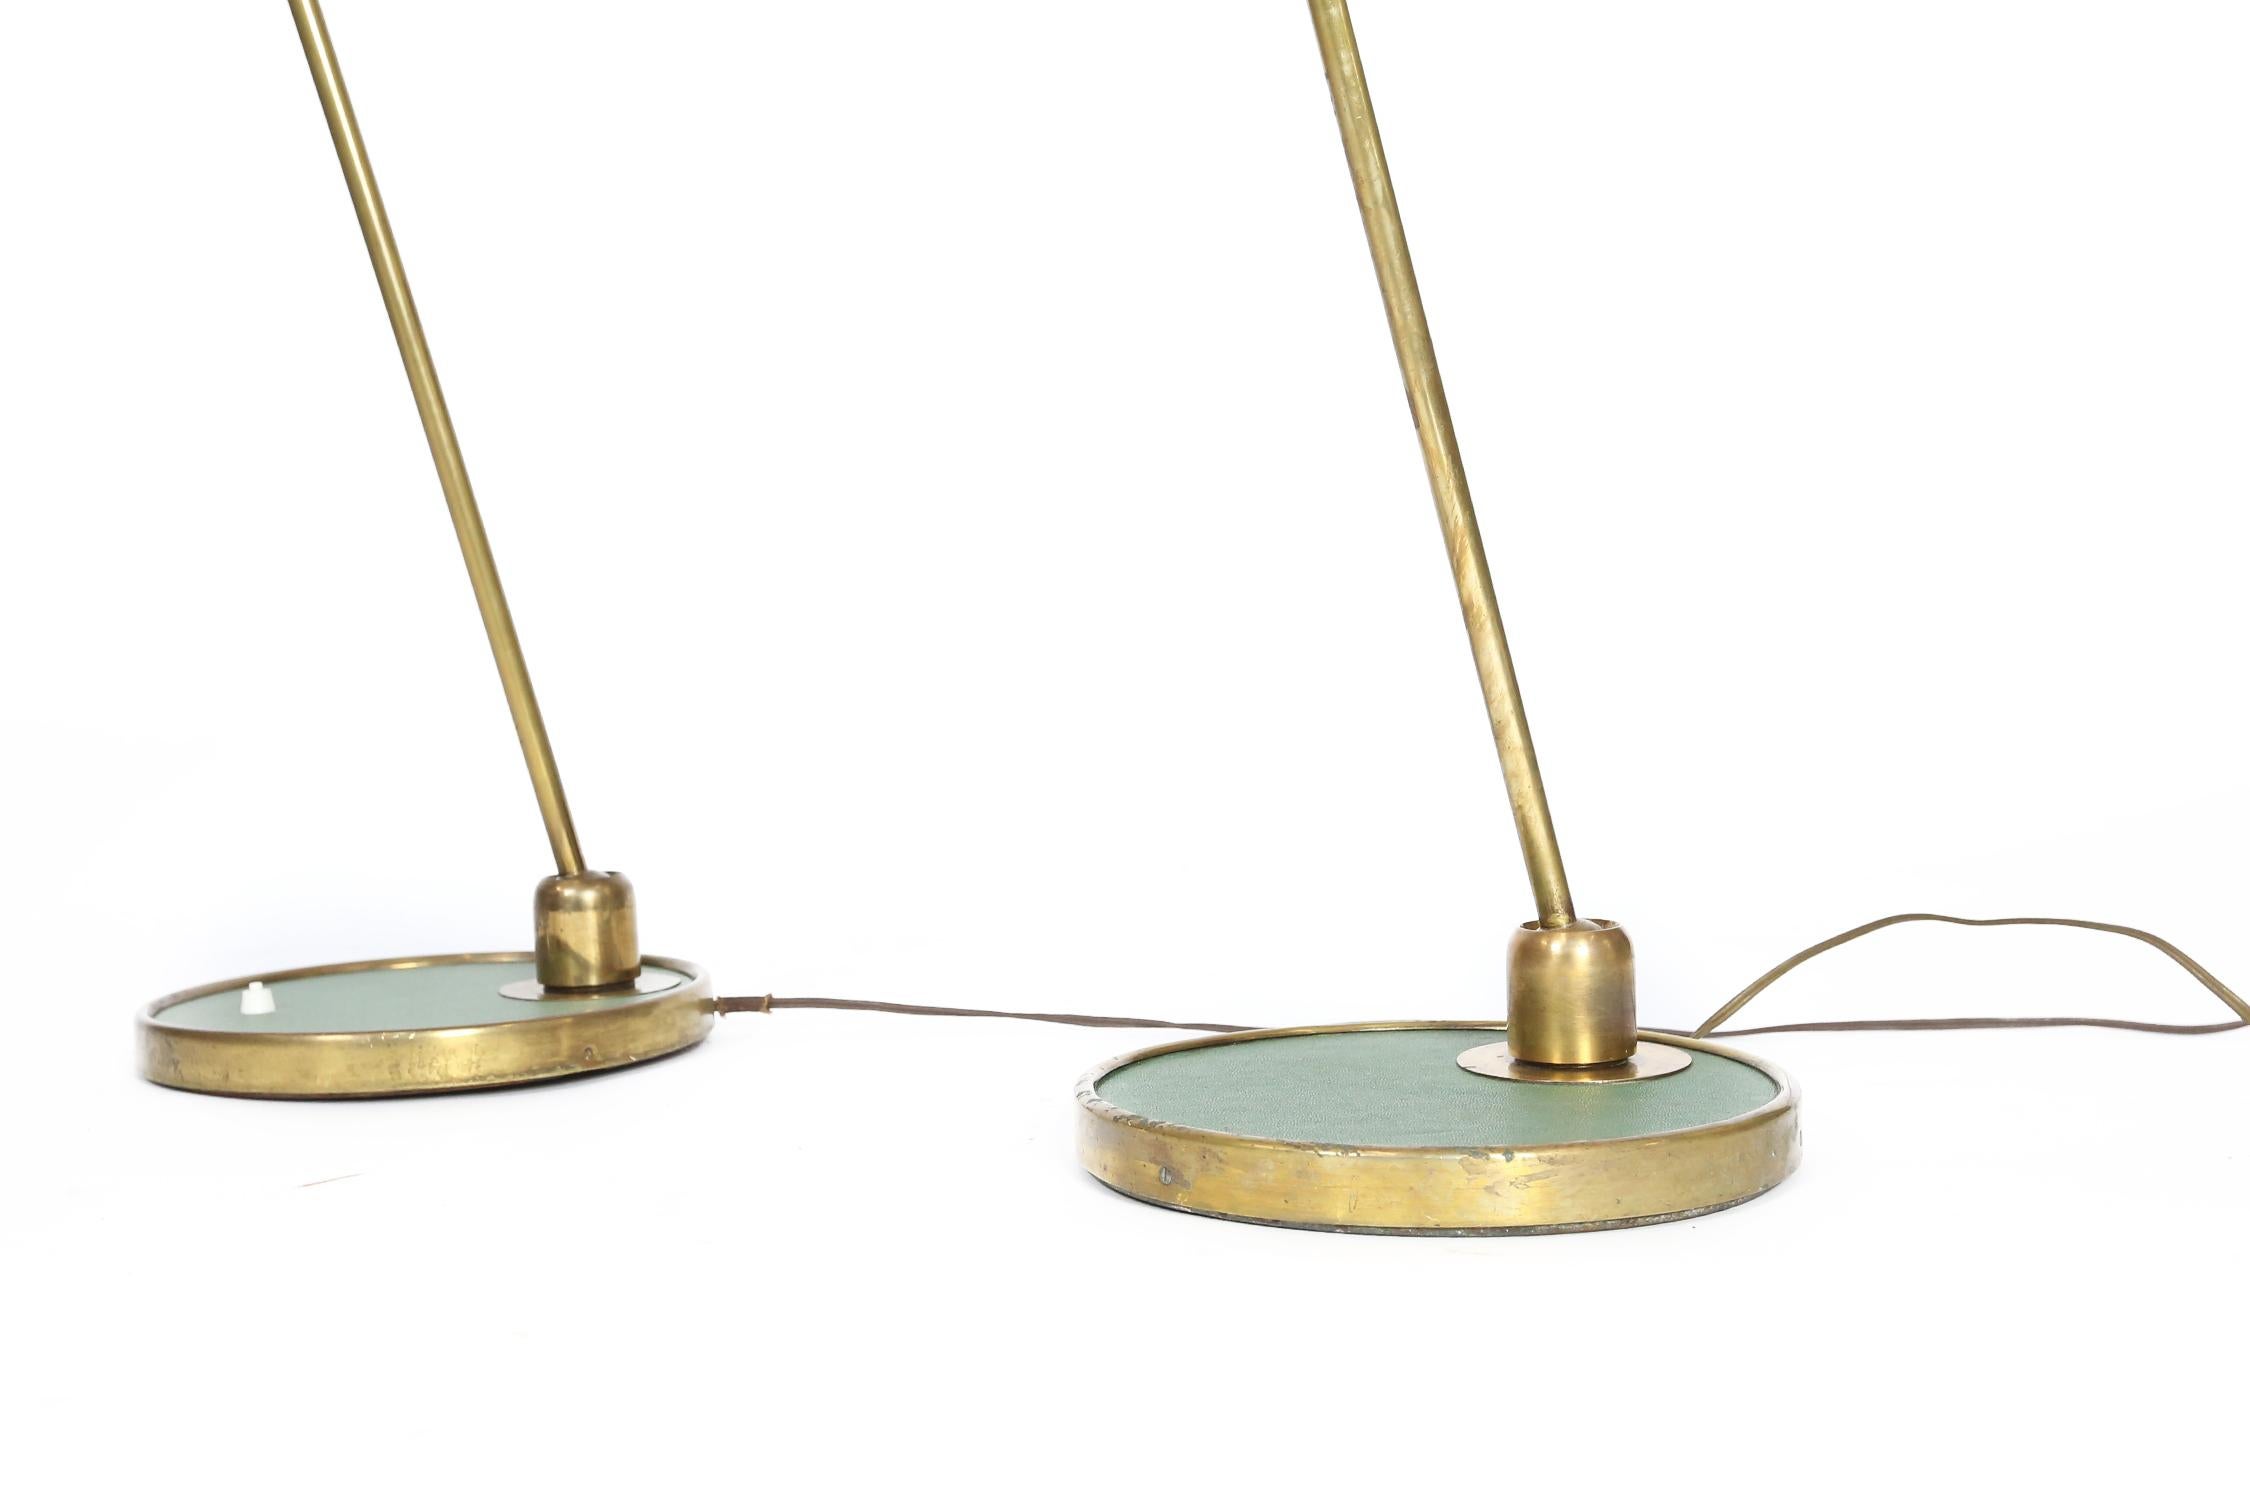 French Maison Lunel Floor Lamps with Original Diabolo Shades, 1950s For Sale 1